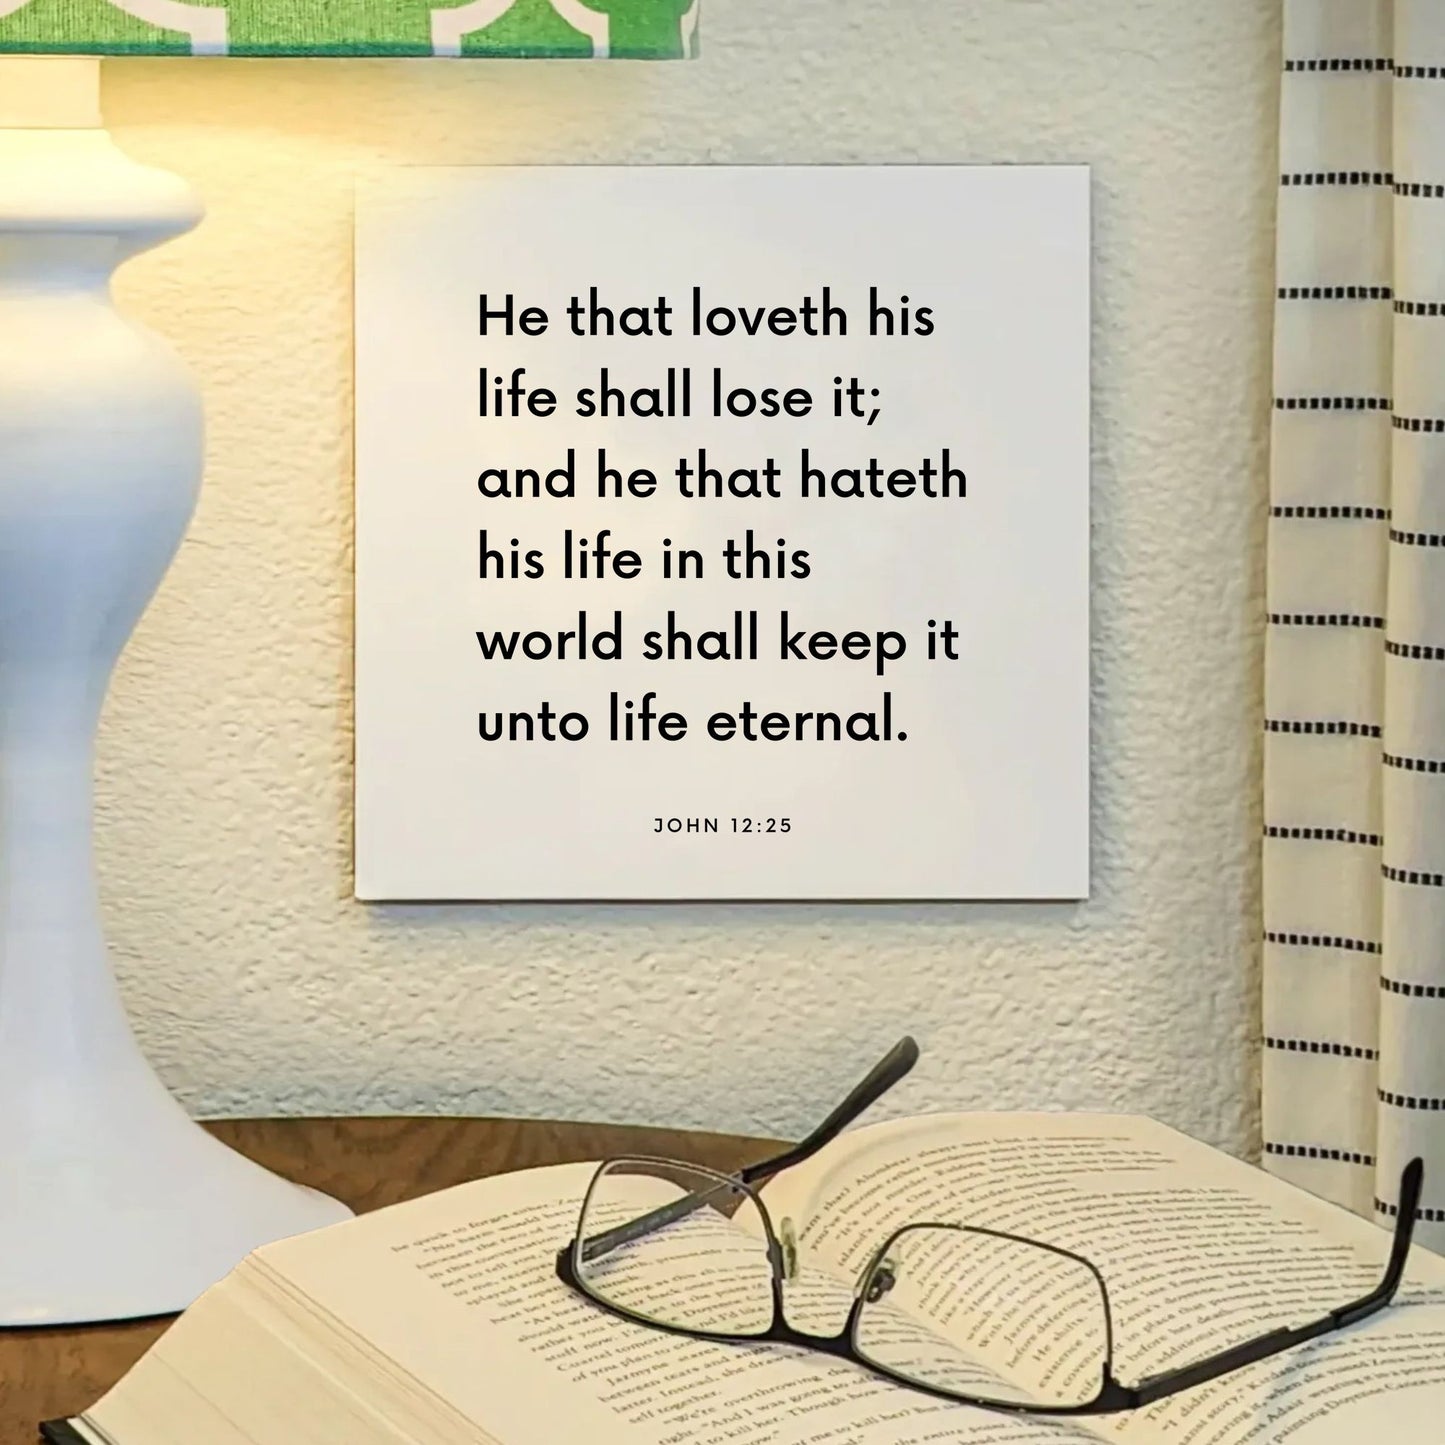 Lamp mouting of the scripture tile for John 12:25 - "He that loveth his life shall lose it"